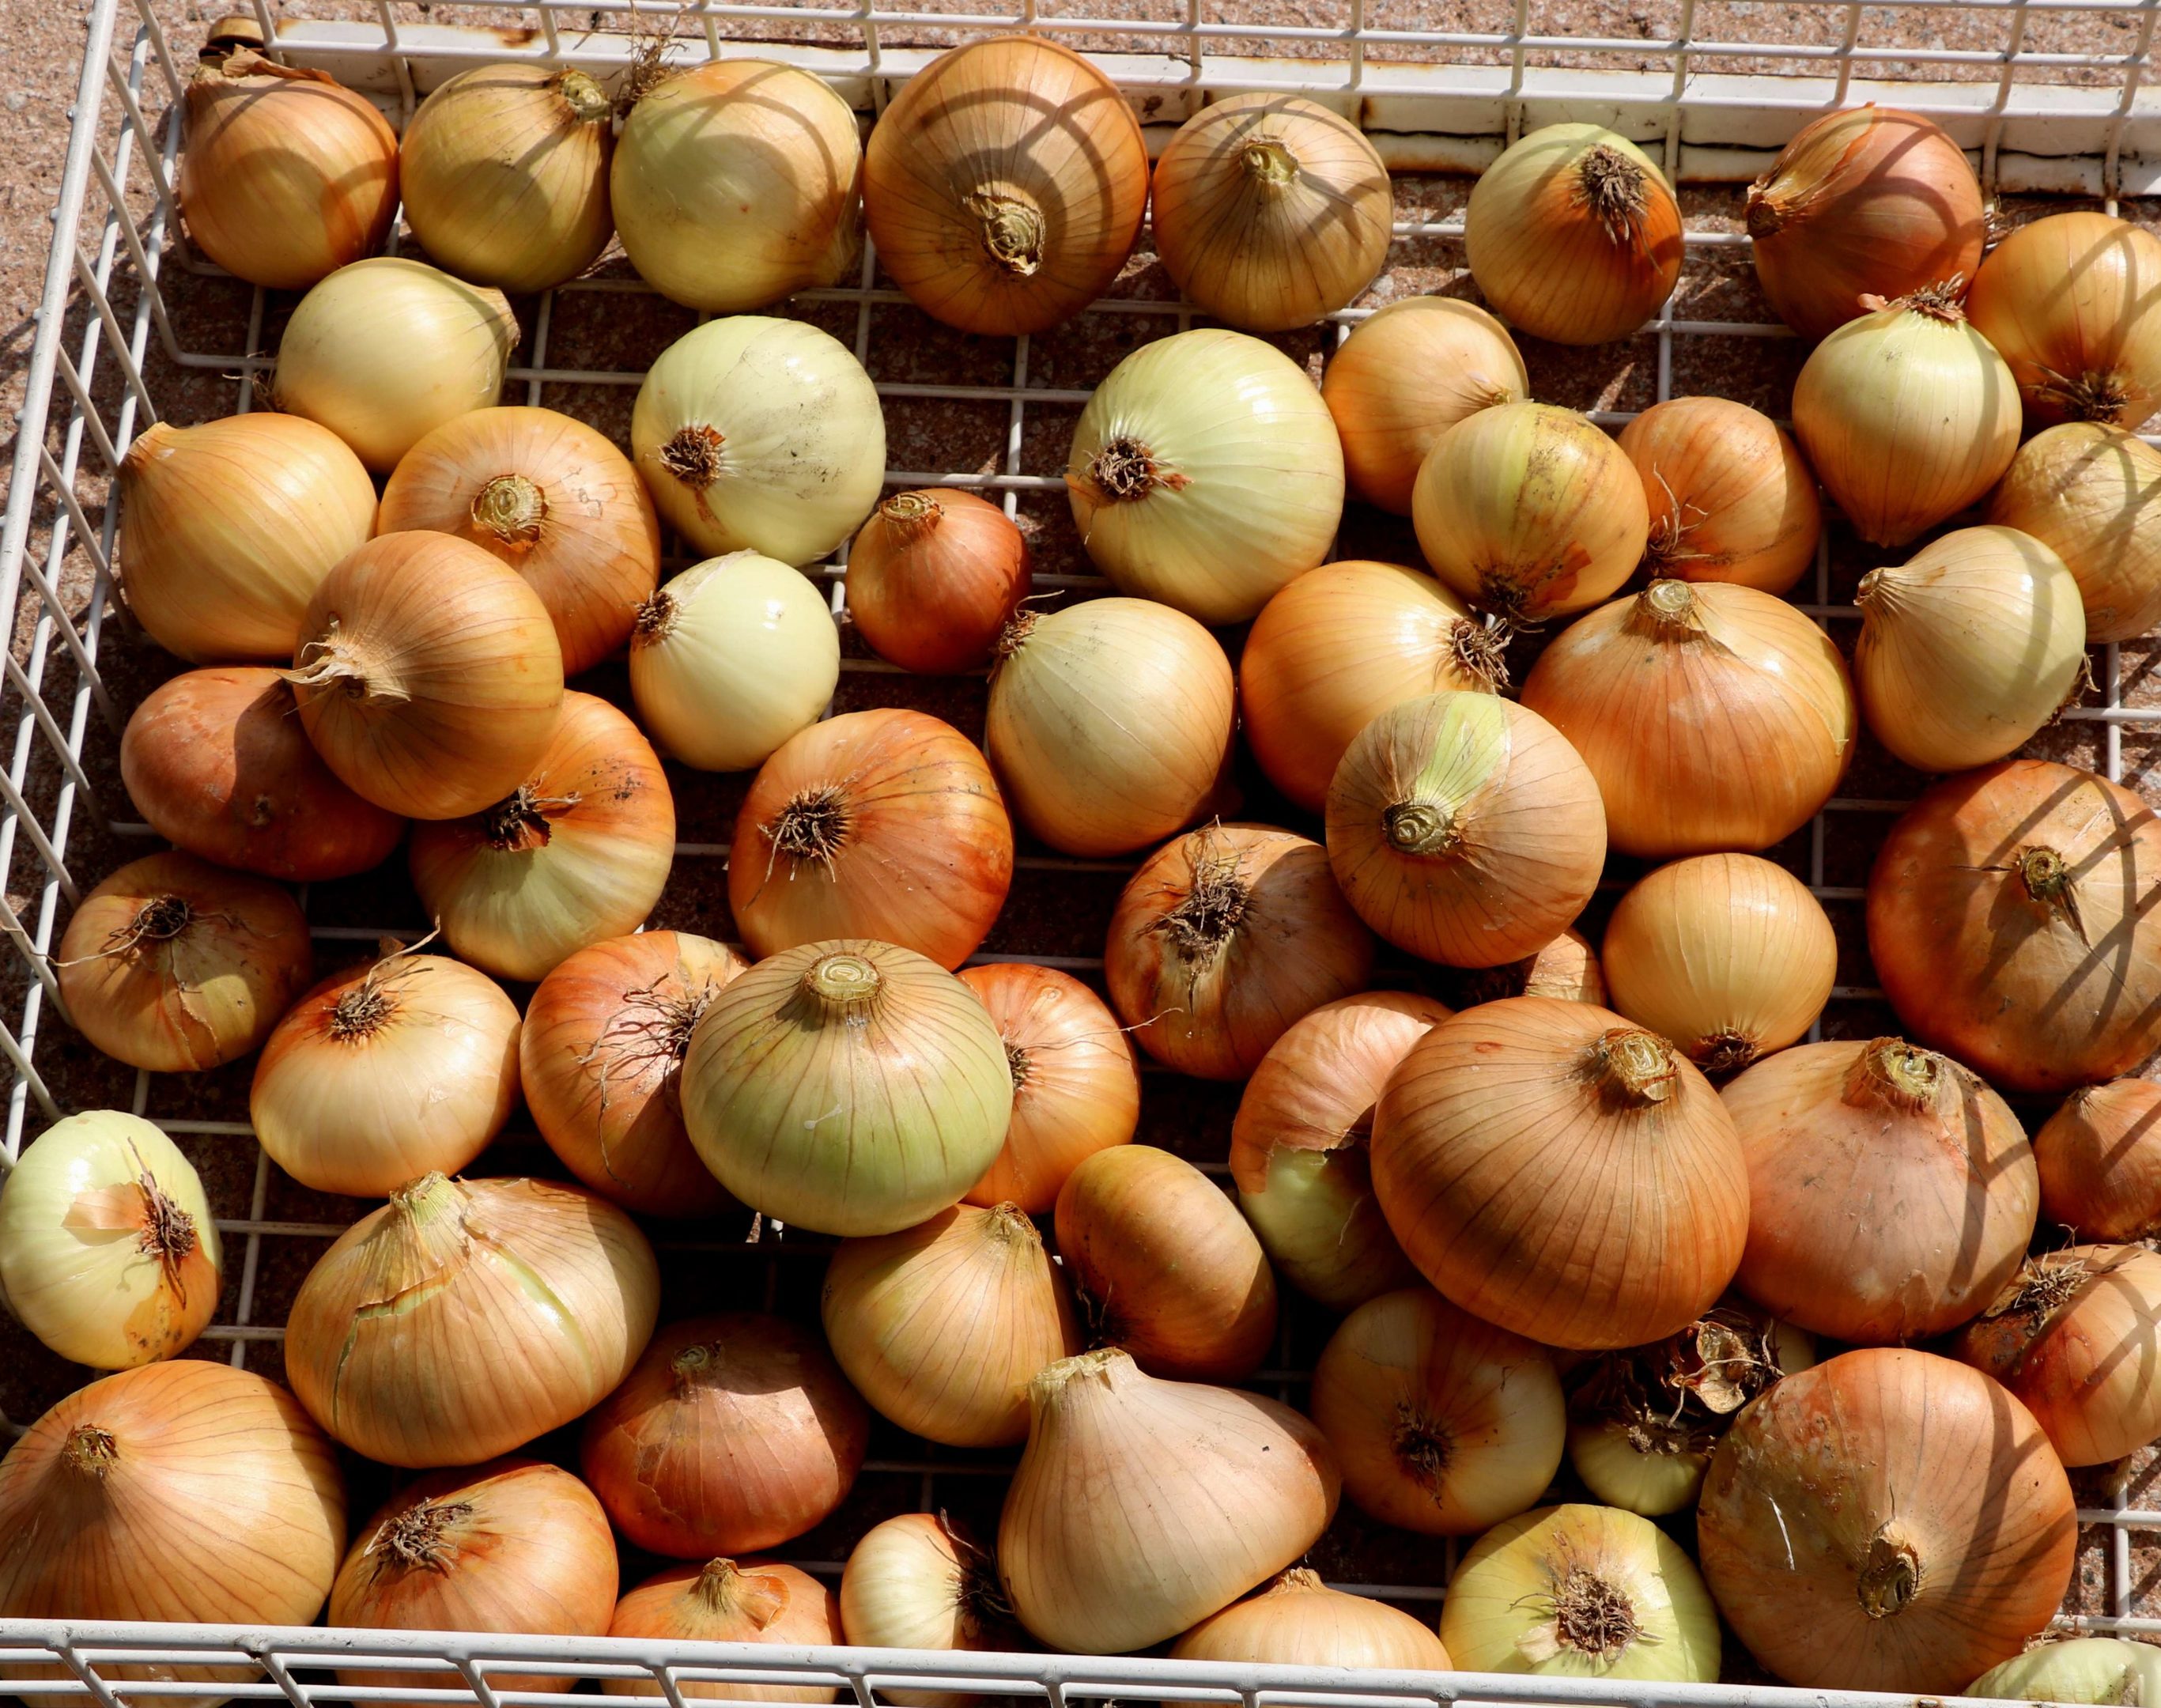 Onions ready for storing